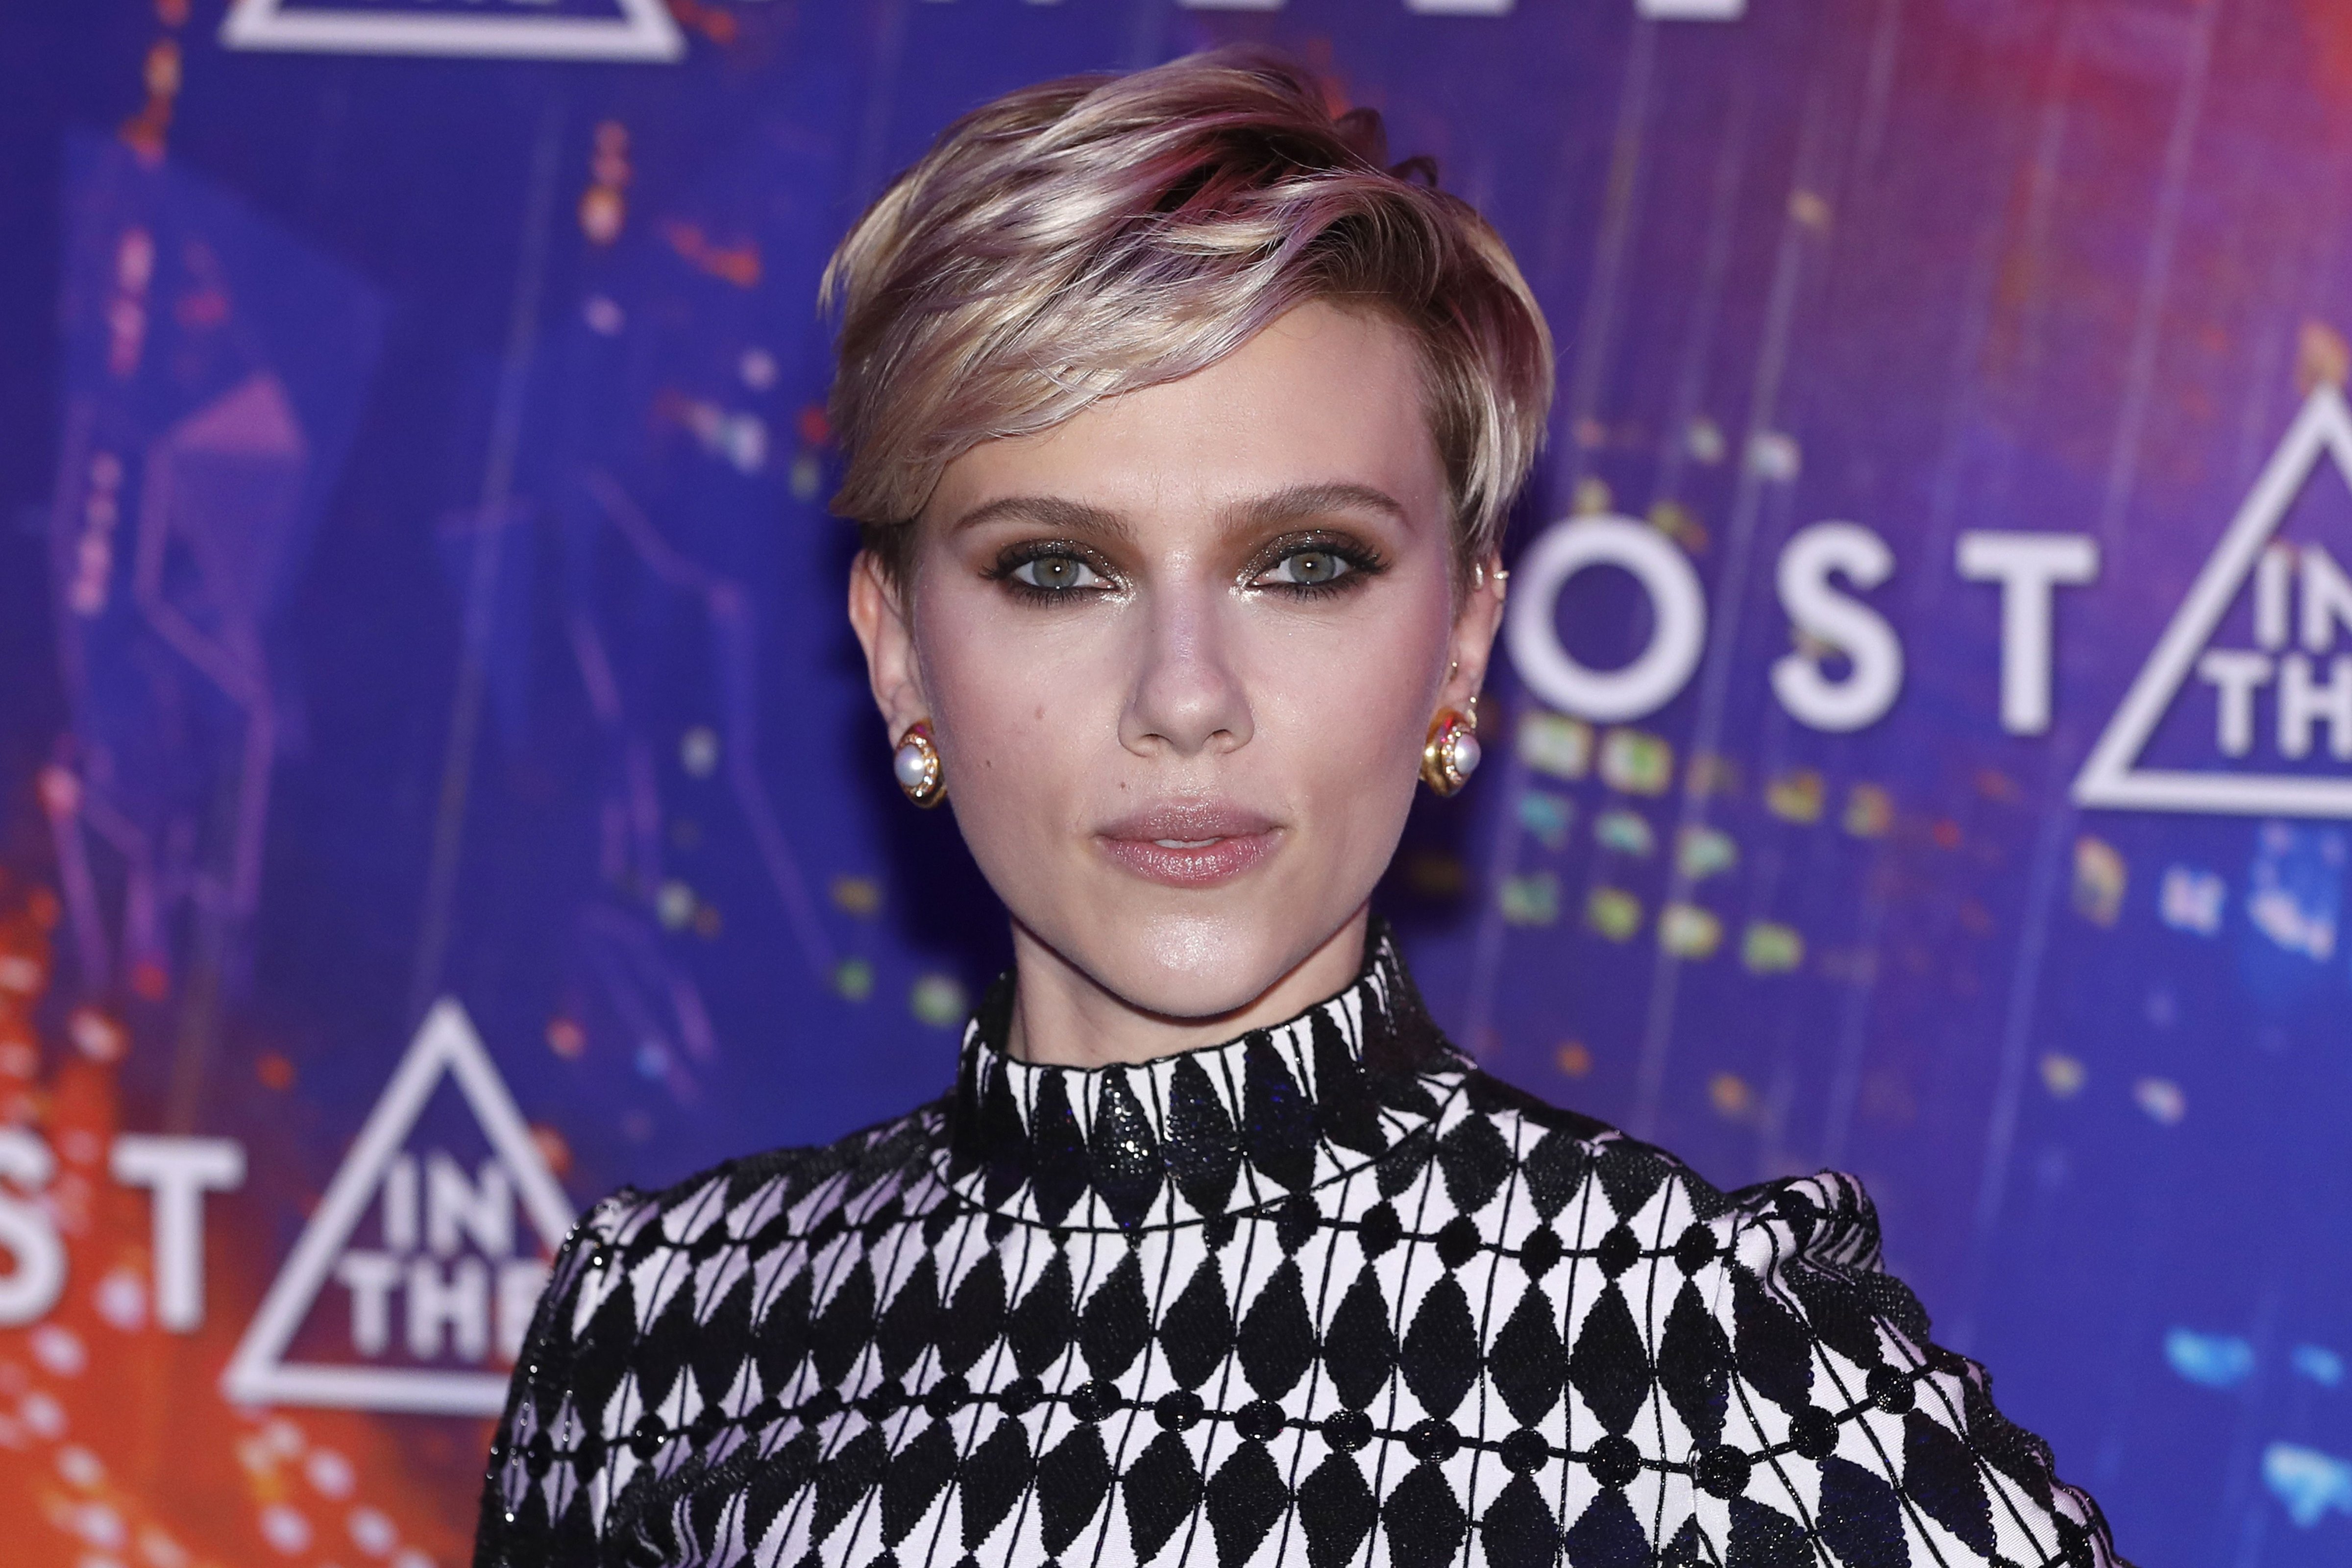 US actress Scarlett Johansson poses during the premiere of "Ghost in the Shell" on March 21, 2017 in Paris. 
                       / AFP PHOTO / PATRICK KOVARIK        (Photo credit should read PATRICK KOVARIK/AFP/Getty Images) (PATRICK KOVARIK&mdash;AFP/Getty Images)